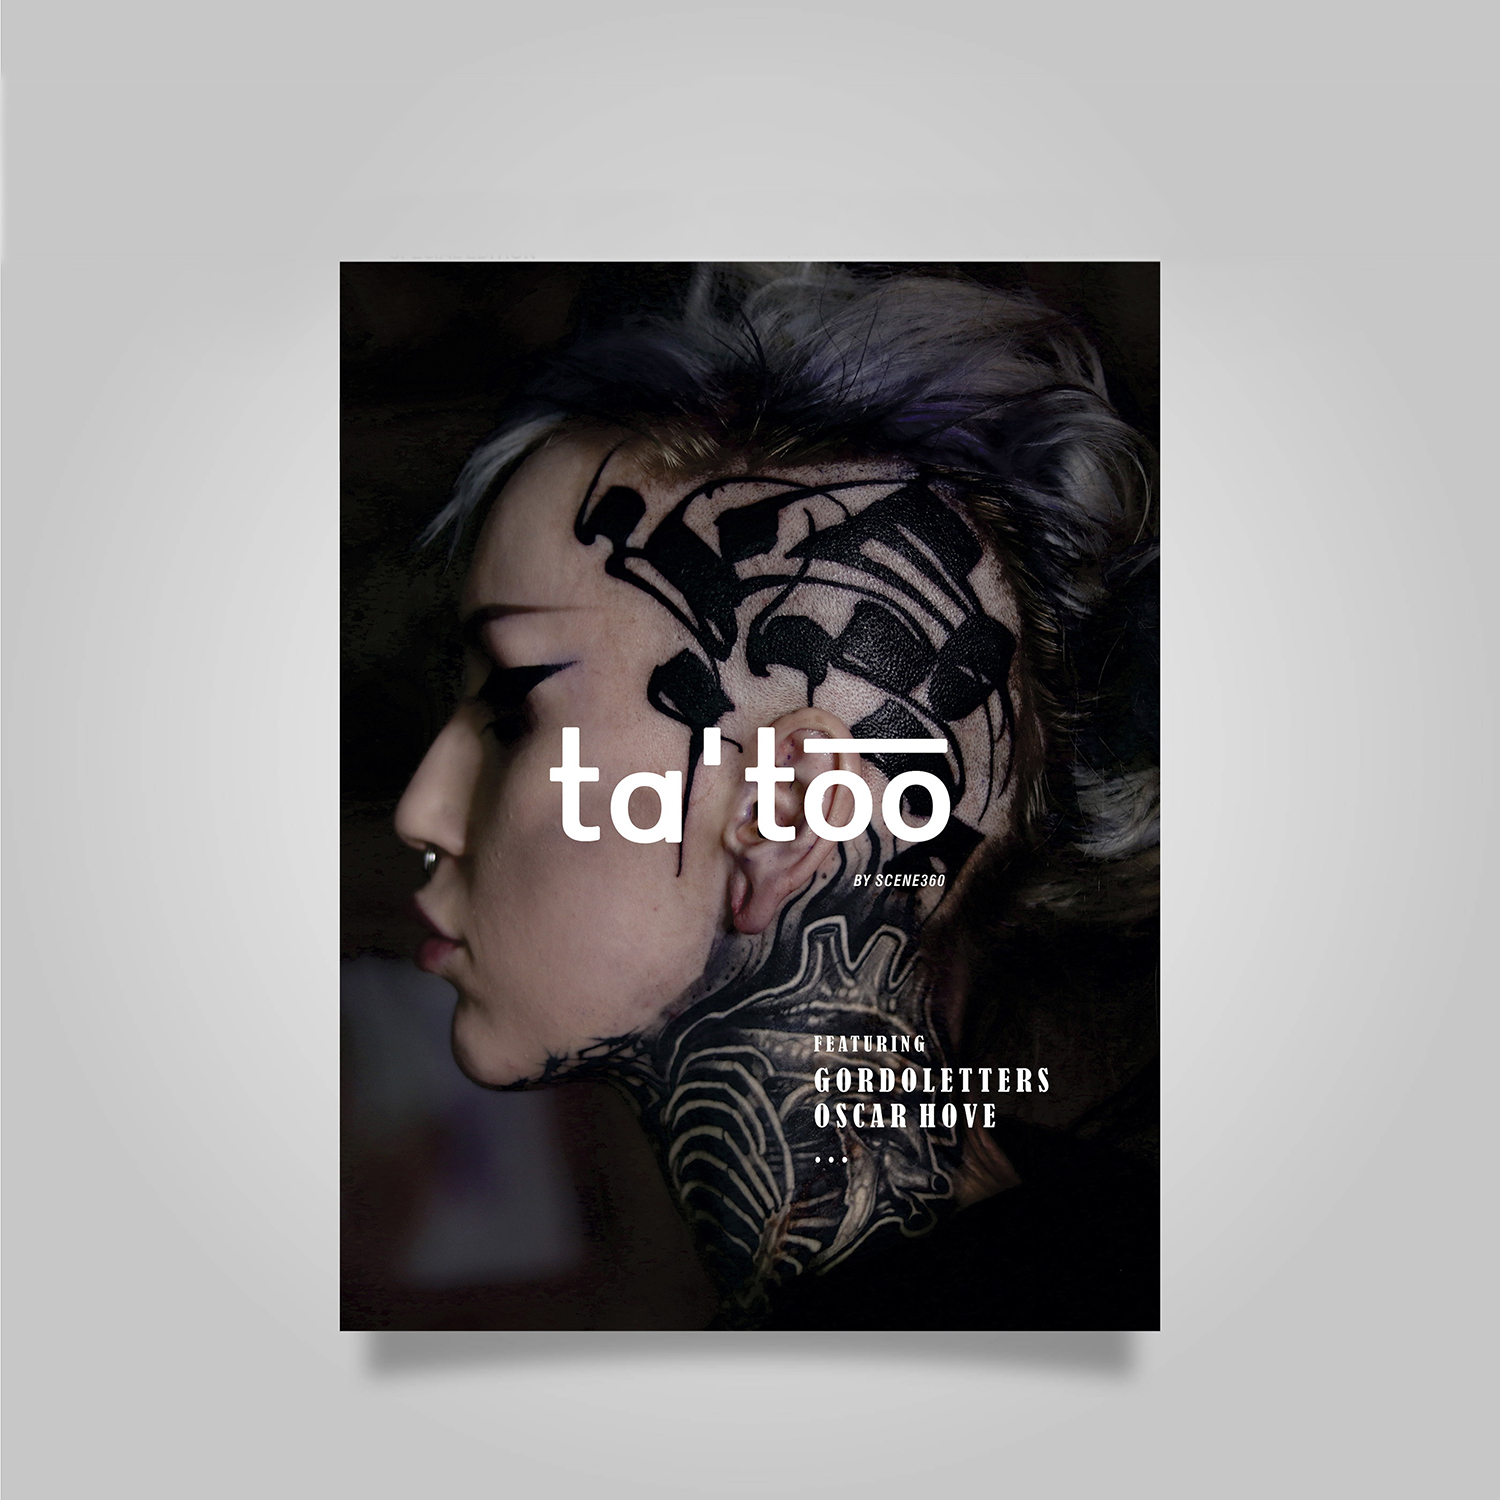 tatoo softcover, annual publication by scene360 and the tattoo journalist